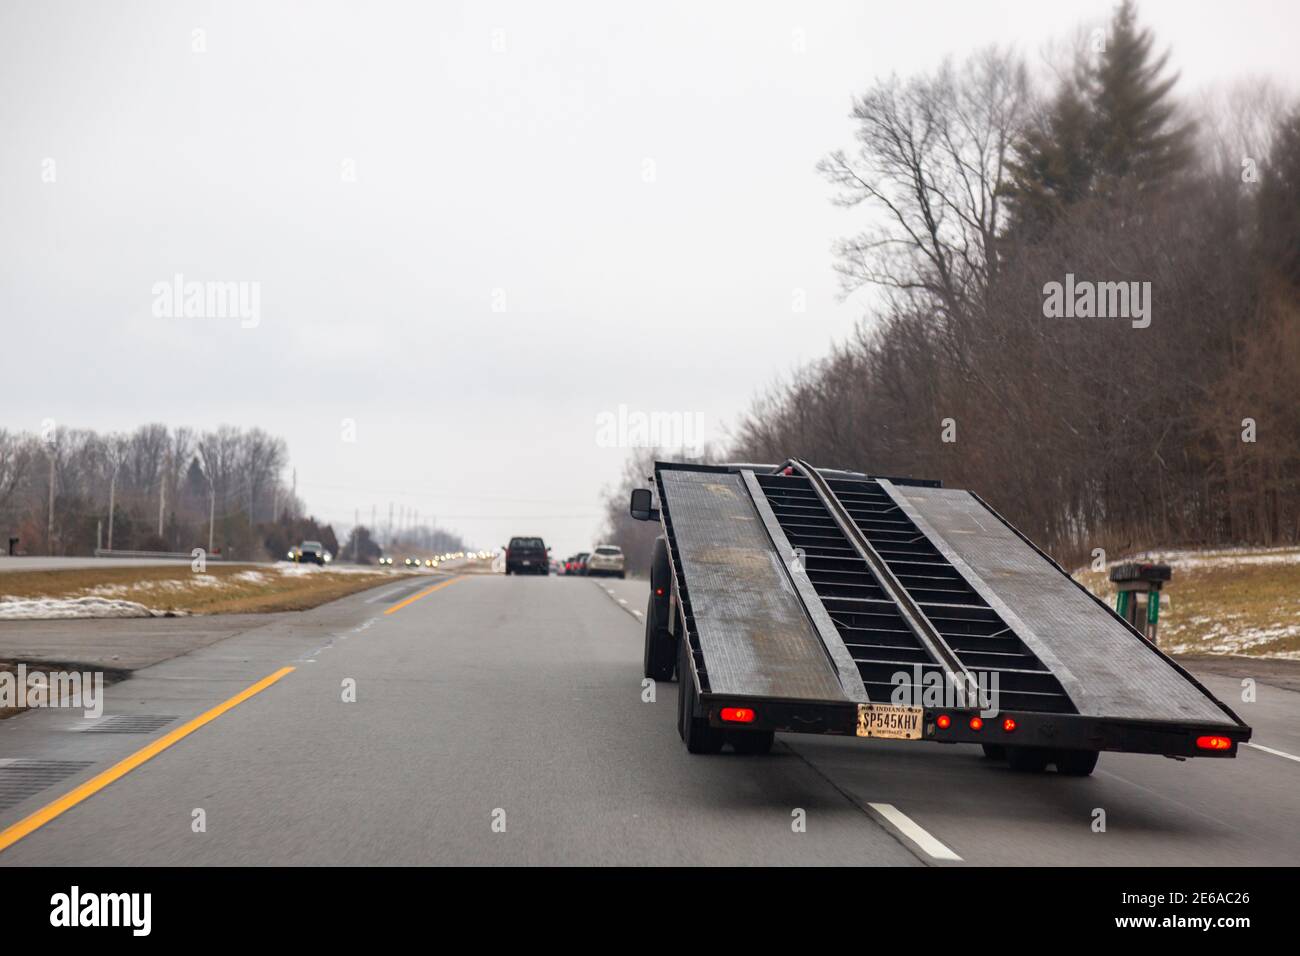 A truck pulling an empty car carrier trailer changes lanes on US 31 on a gloomy Indiana Winter day. Stock Photo